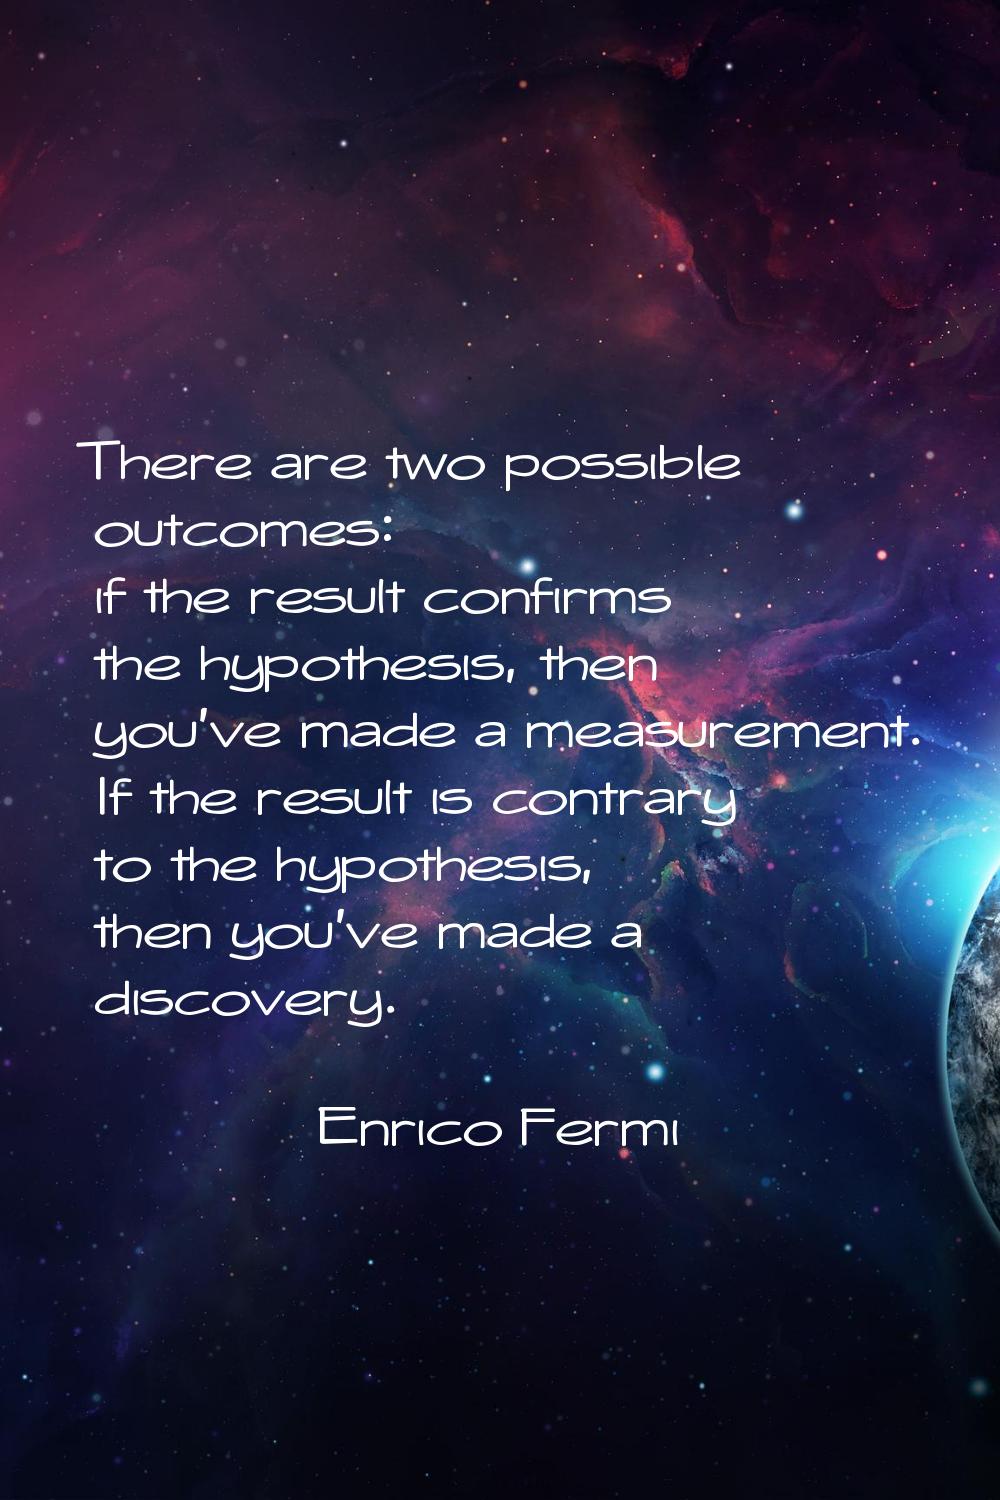 There are two possible outcomes: if the result confirms the hypothesis, then you've made a measurem